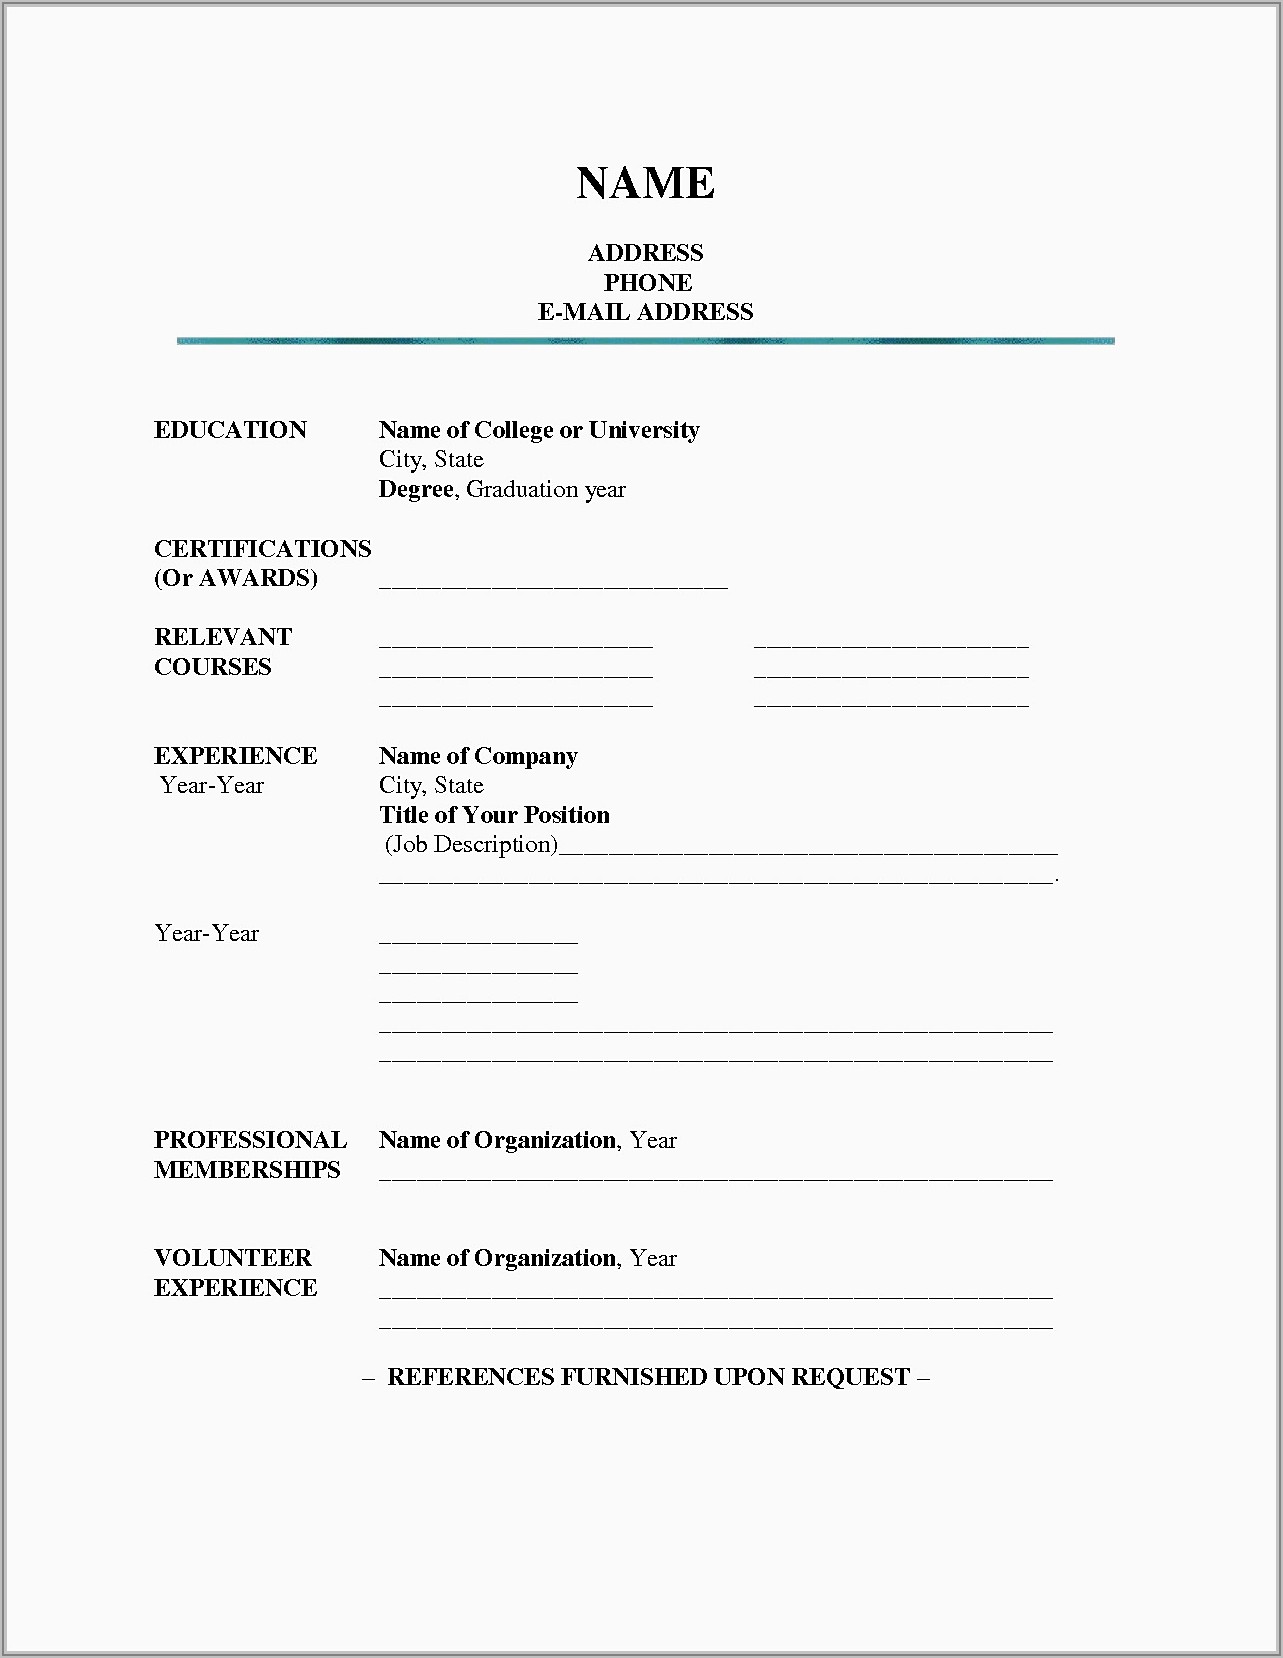 Blank Resumes To Print